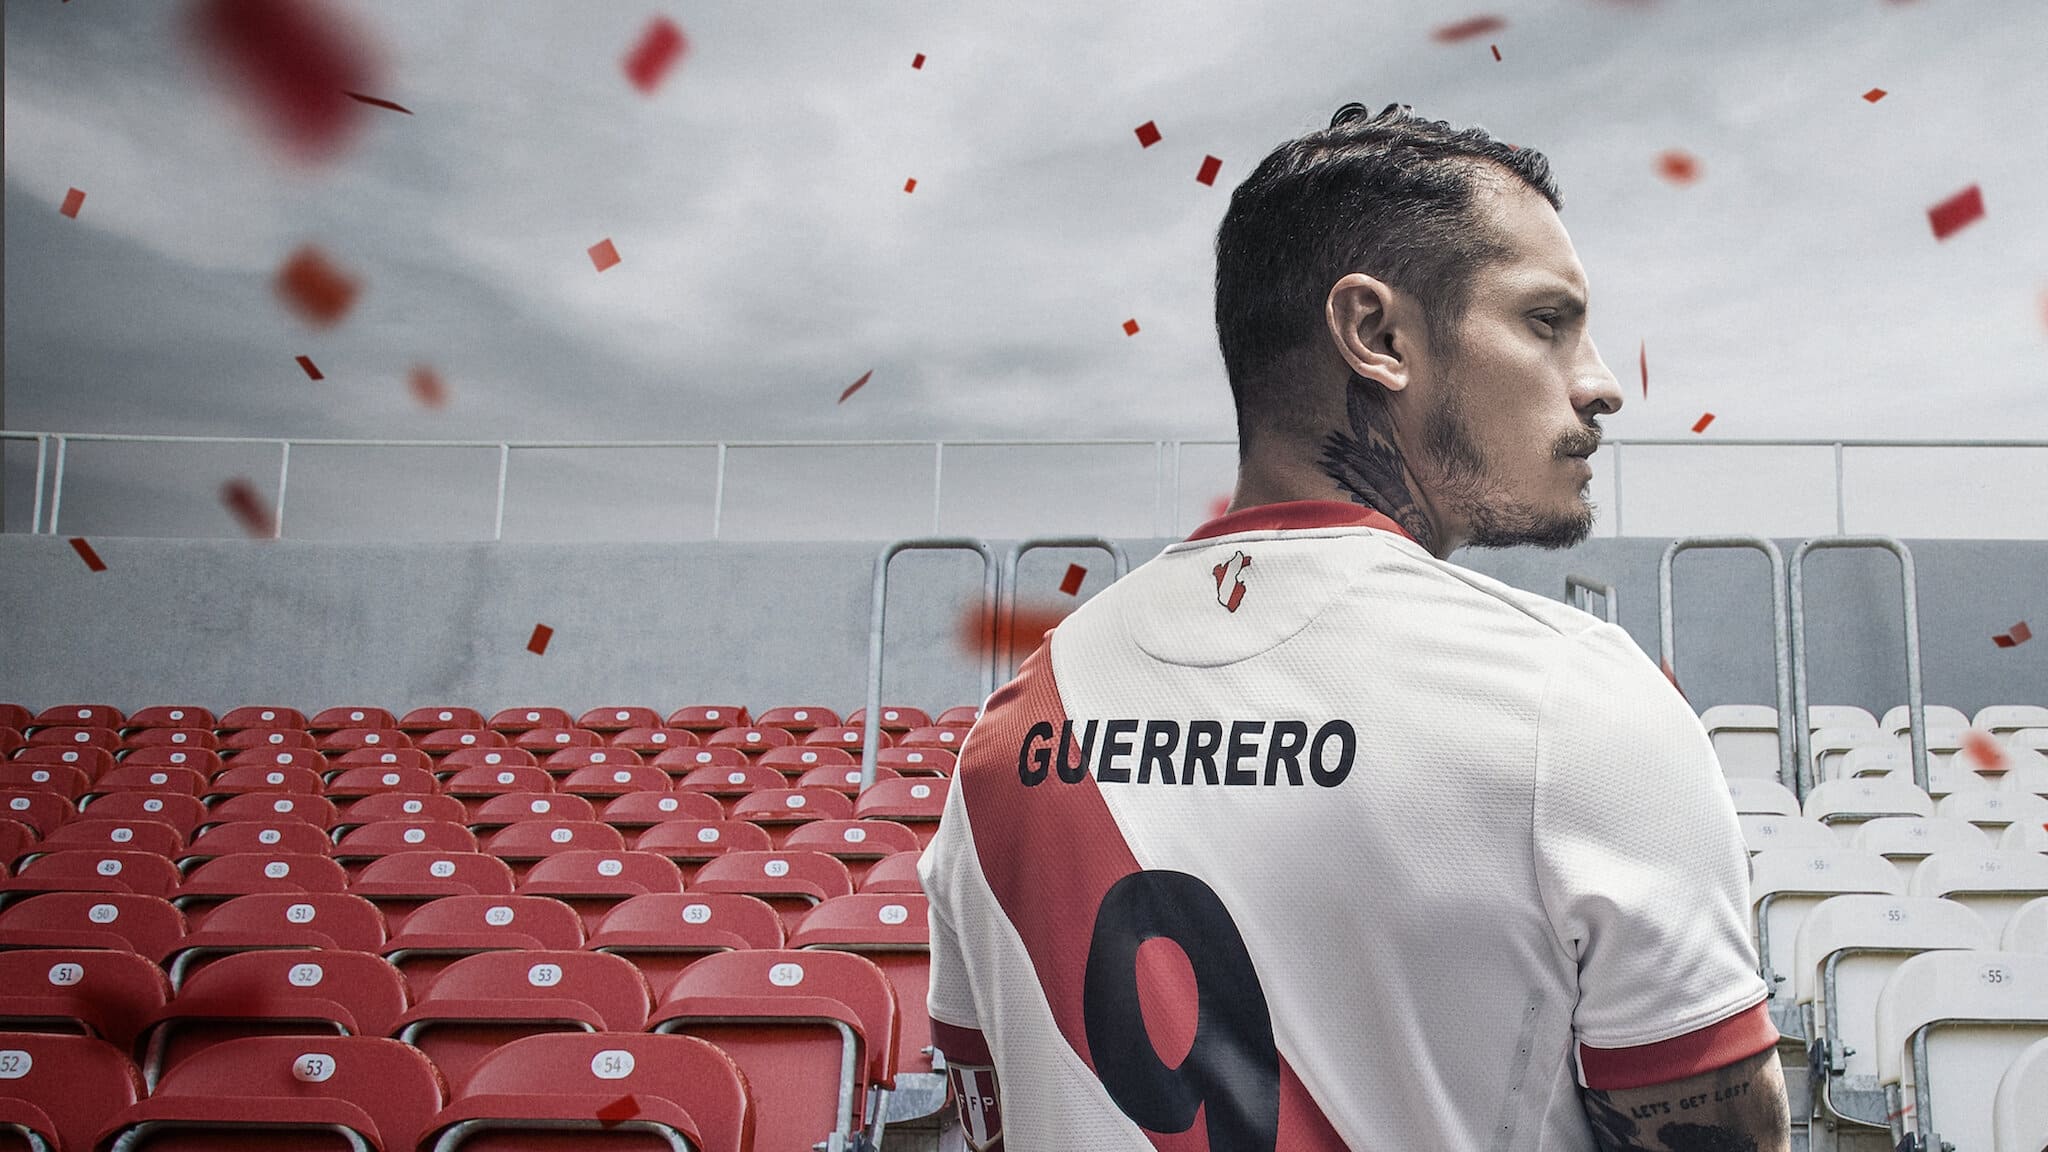 The Fight for Justice: Paolo Guerrero izle